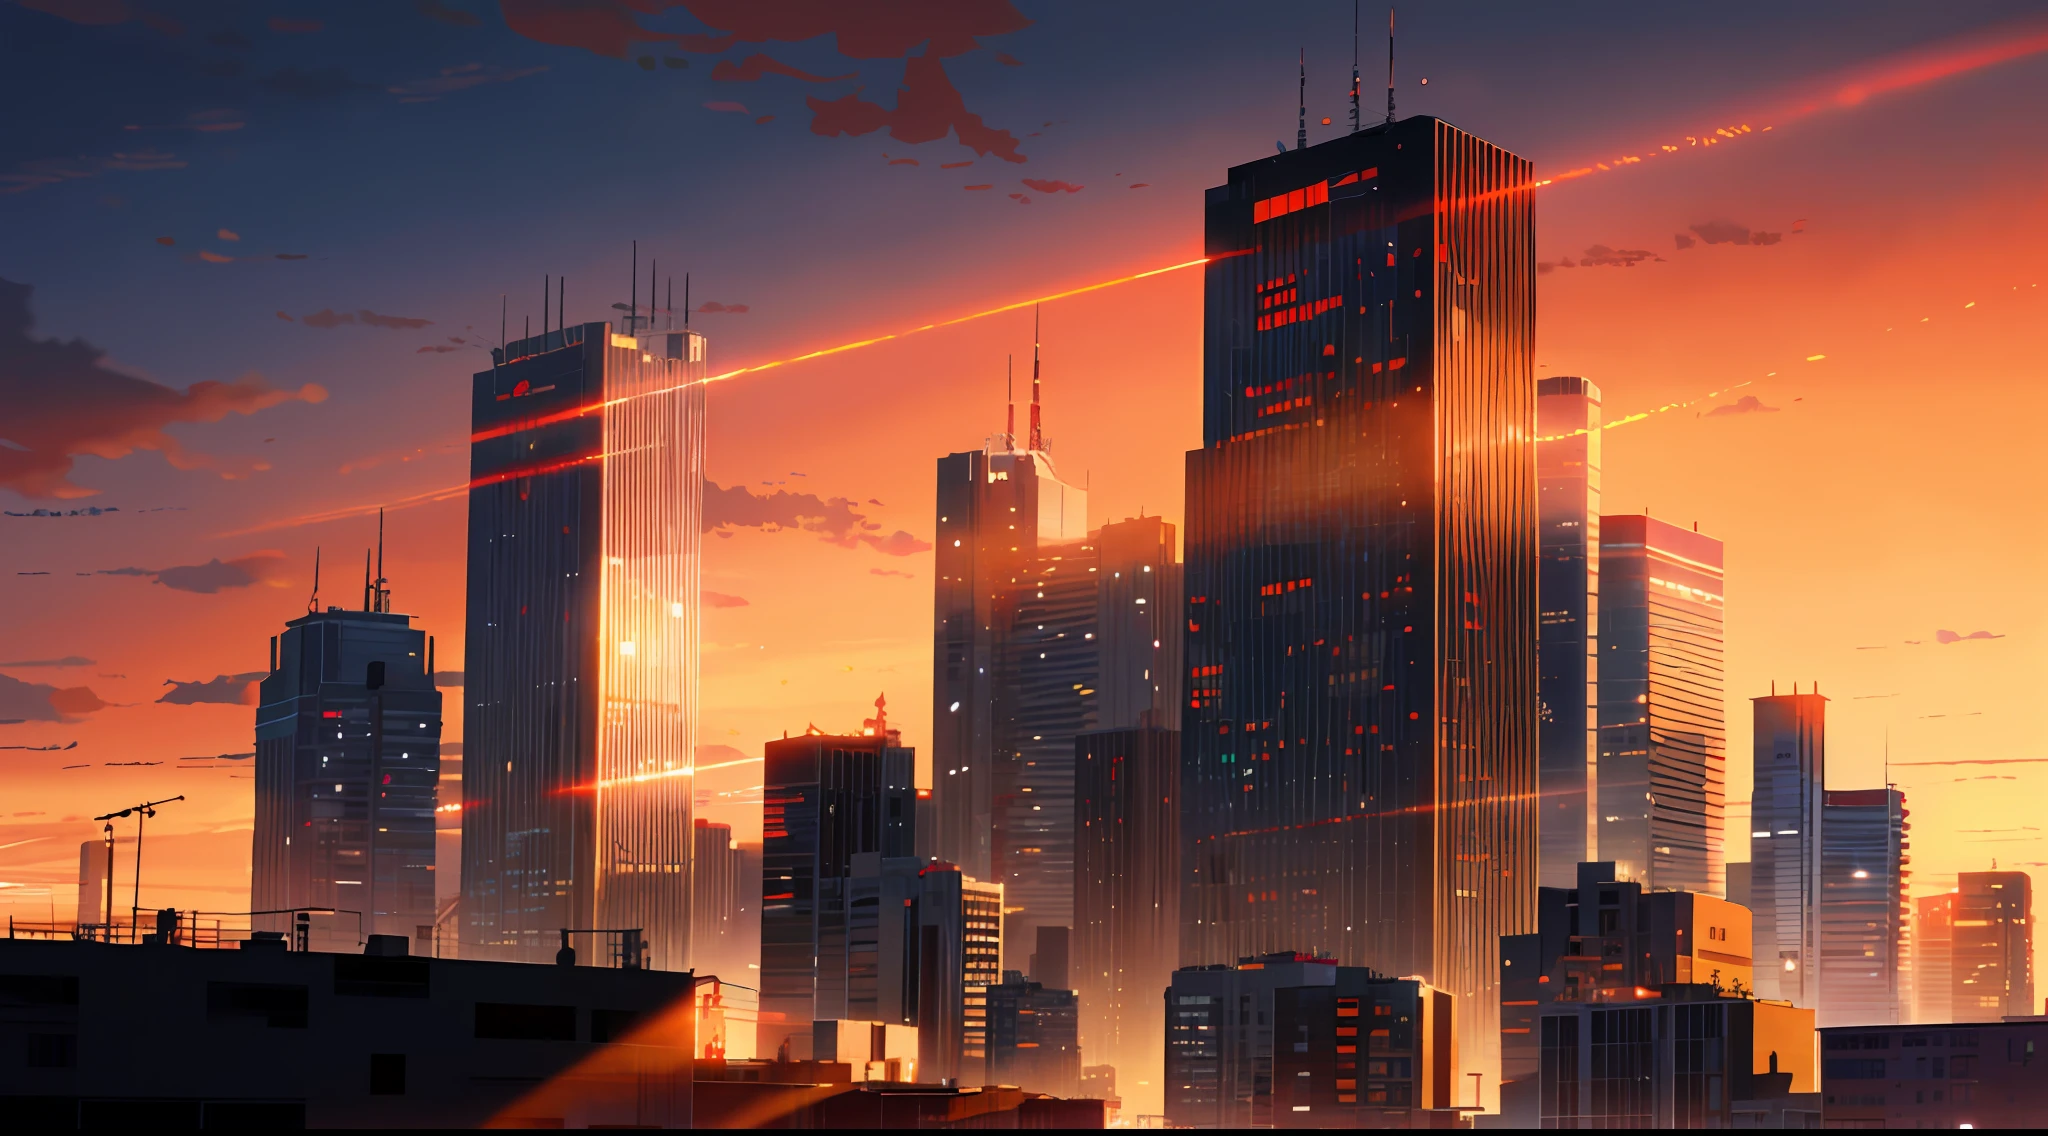 (Masterpiece: 1.2, highest quality), (Lighting) 3, detailed anime-style illustrations, urban buildings dyed by the setting sun looking up from below, buildings in shadow and looking dark and hazy. The entire screen is bright red, Makoto Shinkai, anime style, and the sky is also dyed bright red.